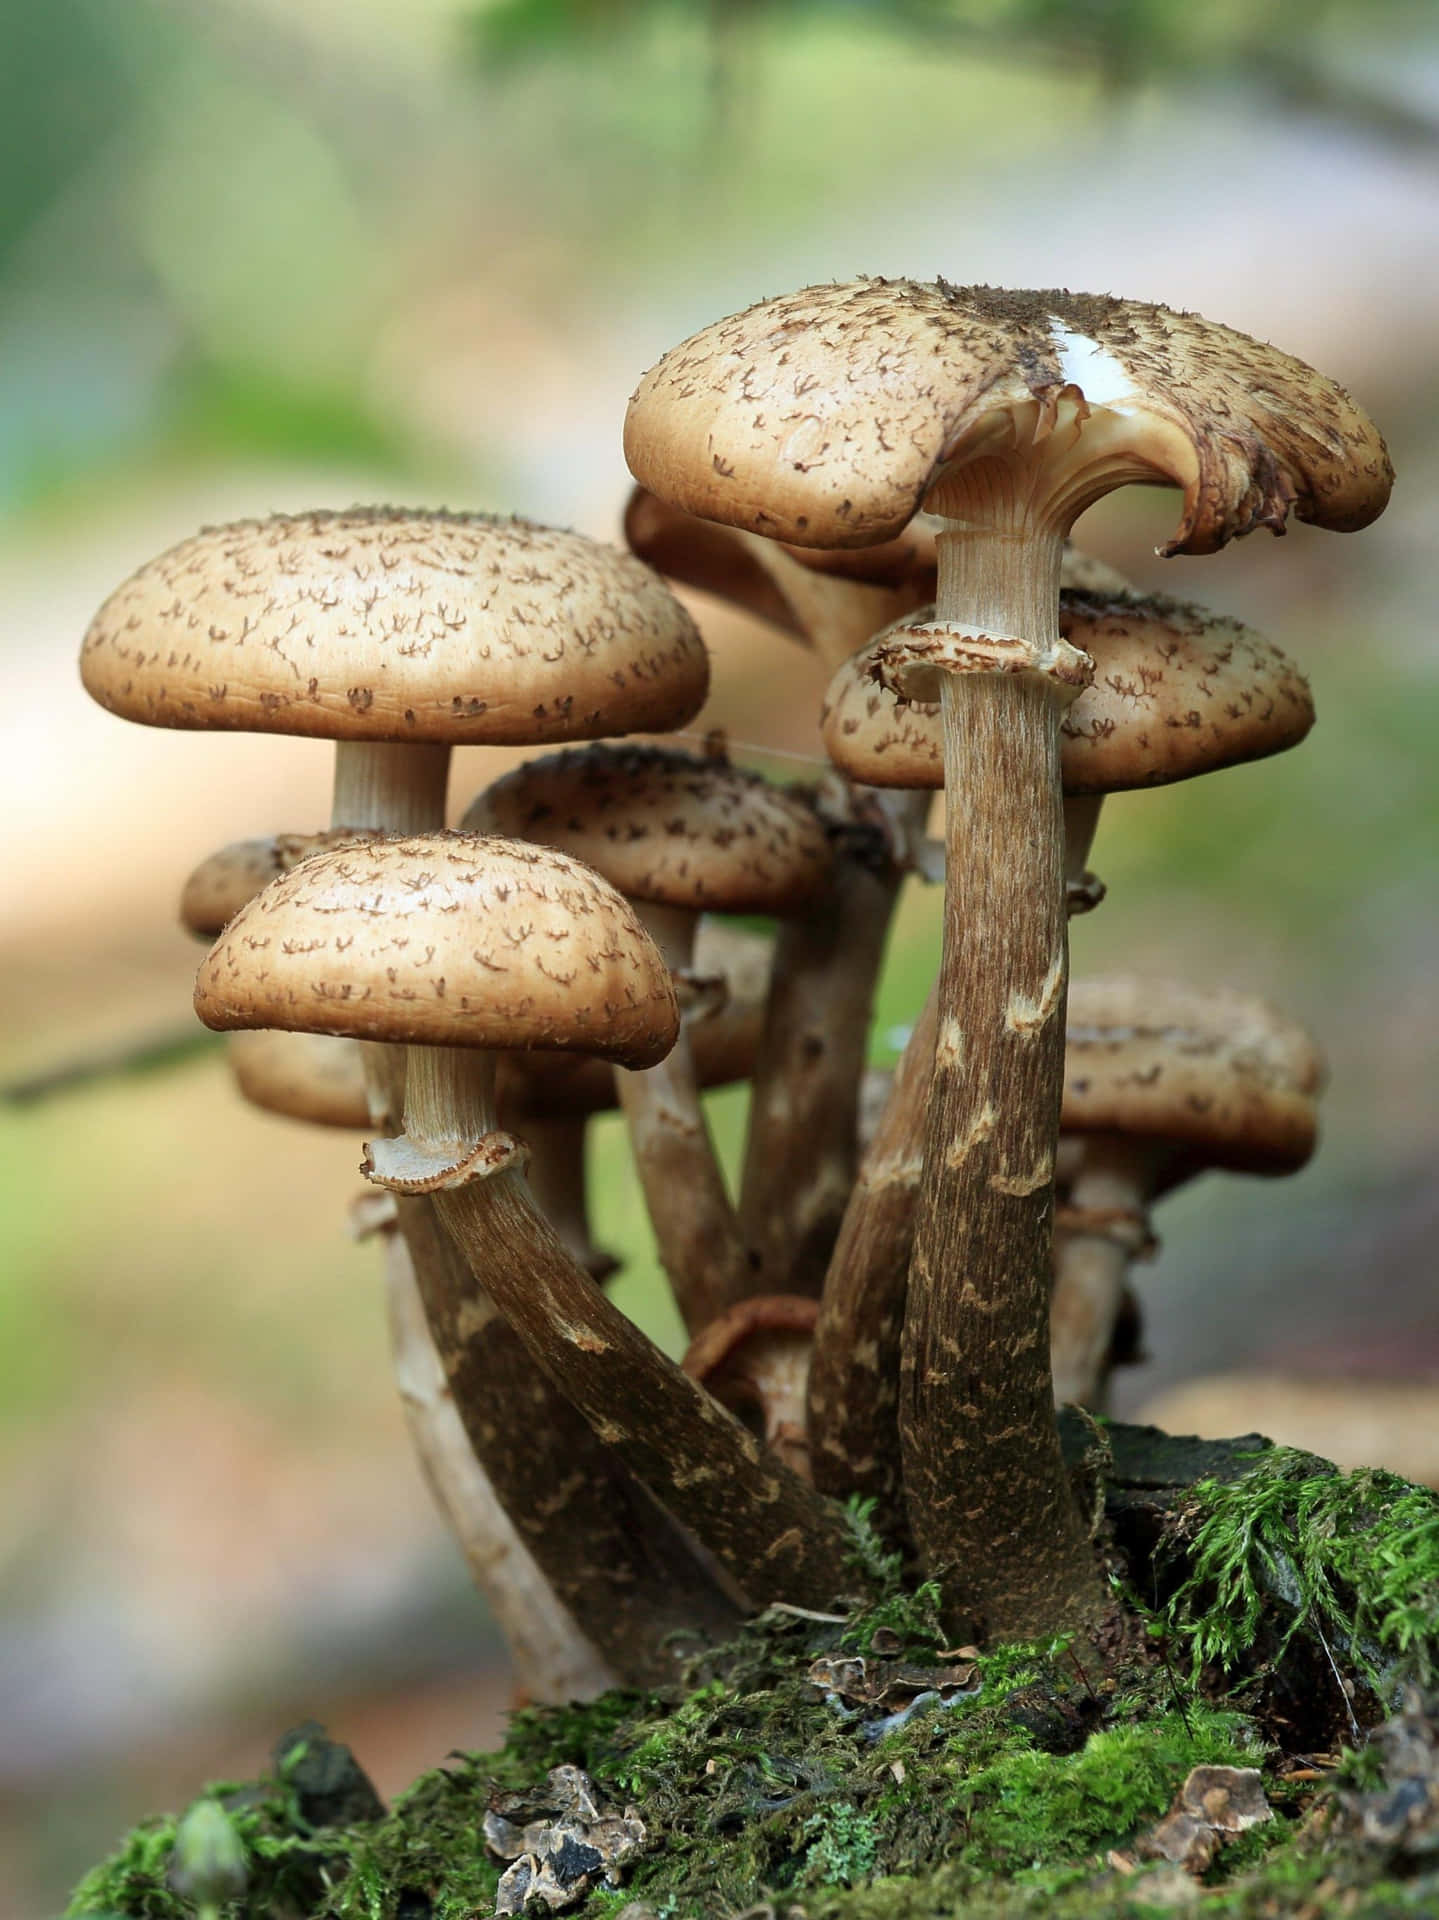 A Group Of Mushrooms Growing On A Mossy Tree Stump Wallpaper